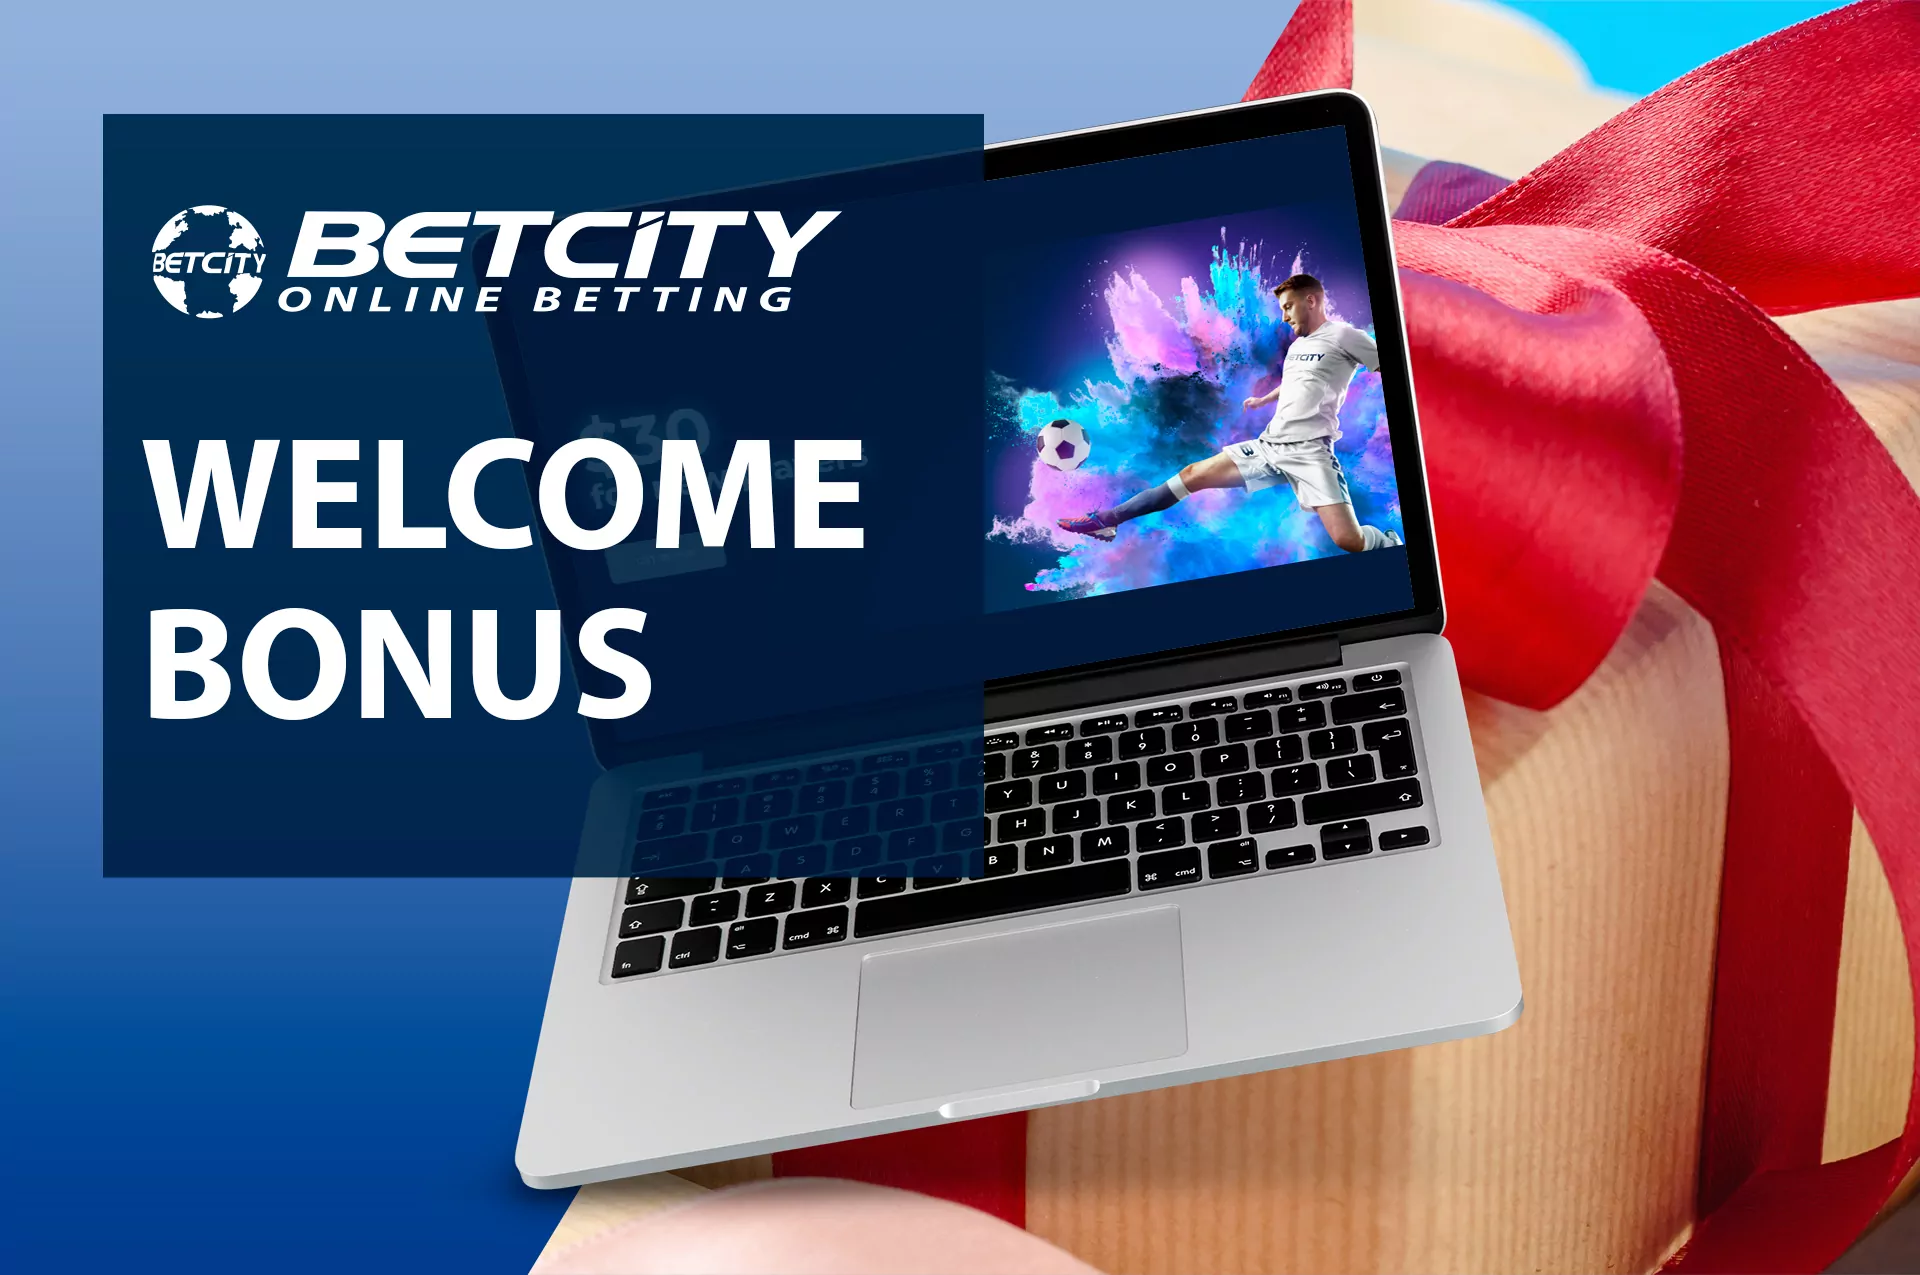 Get your welcome bonus from Betcity right after the first deposit.